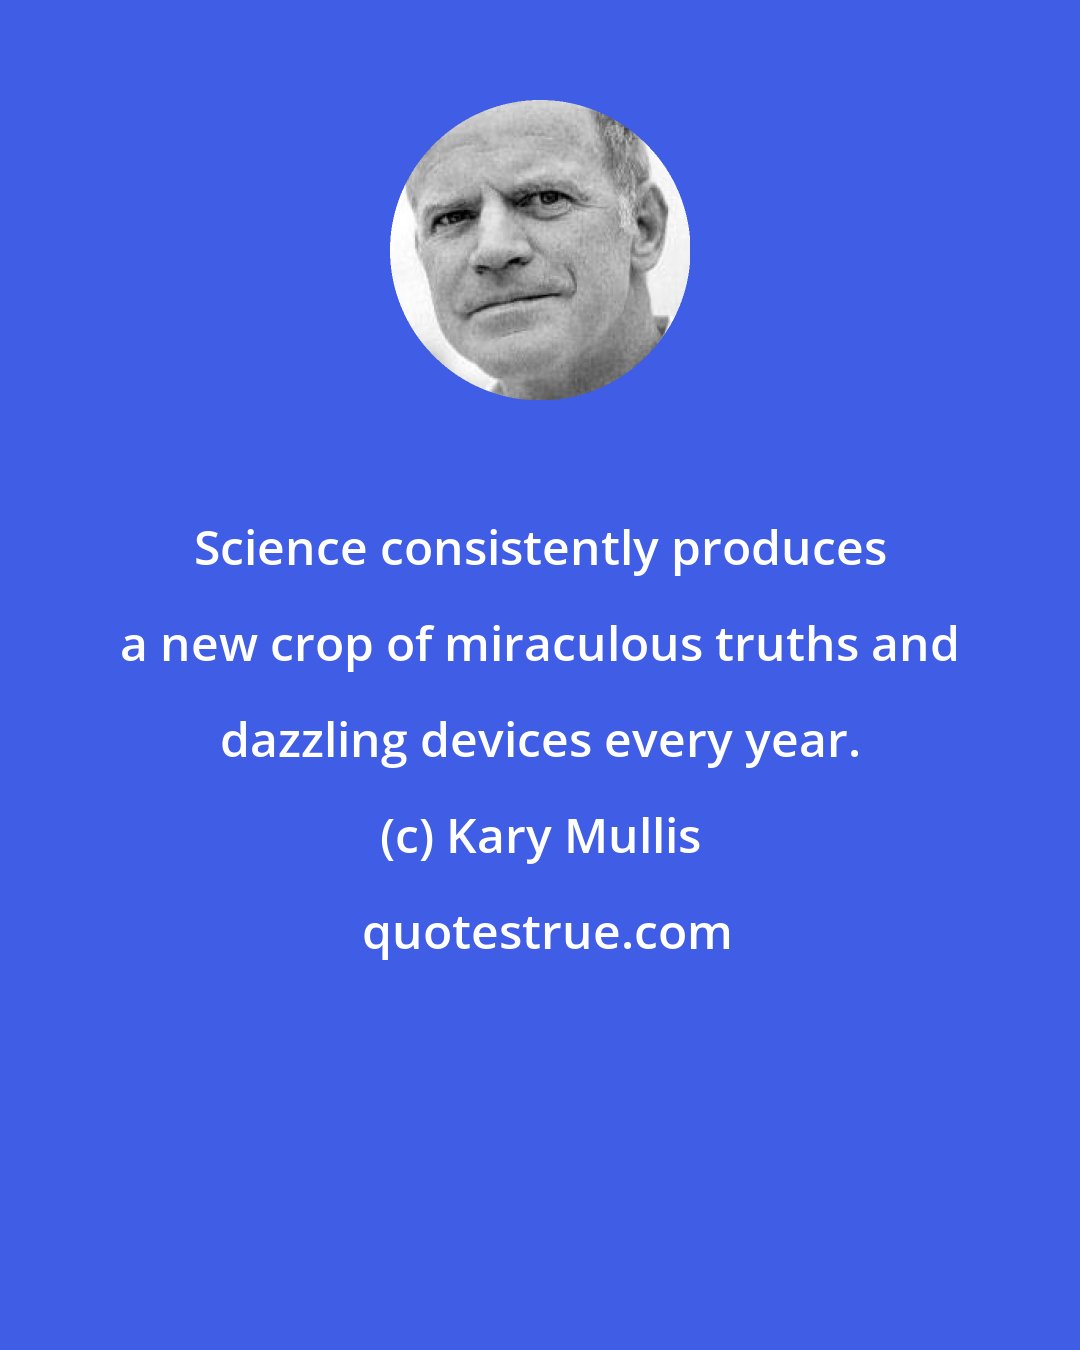 Kary Mullis: Science consistently produces a new crop of miraculous truths and dazzling devices every year.